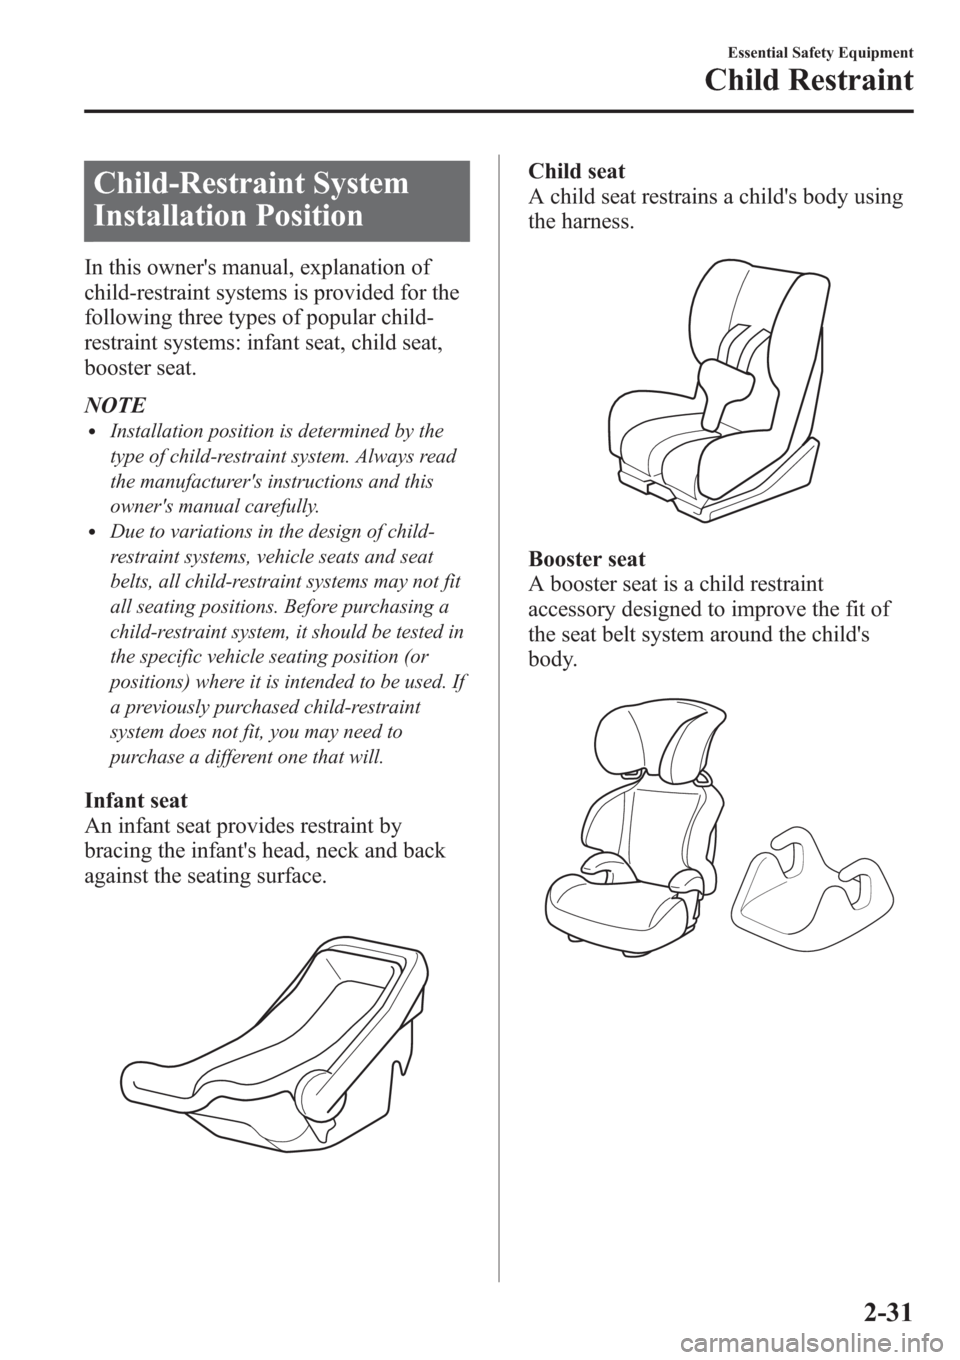 MAZDA MODEL 3 HATCHBACK 2013   (in English) Service Manual Child-Restraint System
Installation Position
In this owners manual, explanation of
child-restraint systems is provided for the
following three types of popular child-
restraint systems: infant seat, 